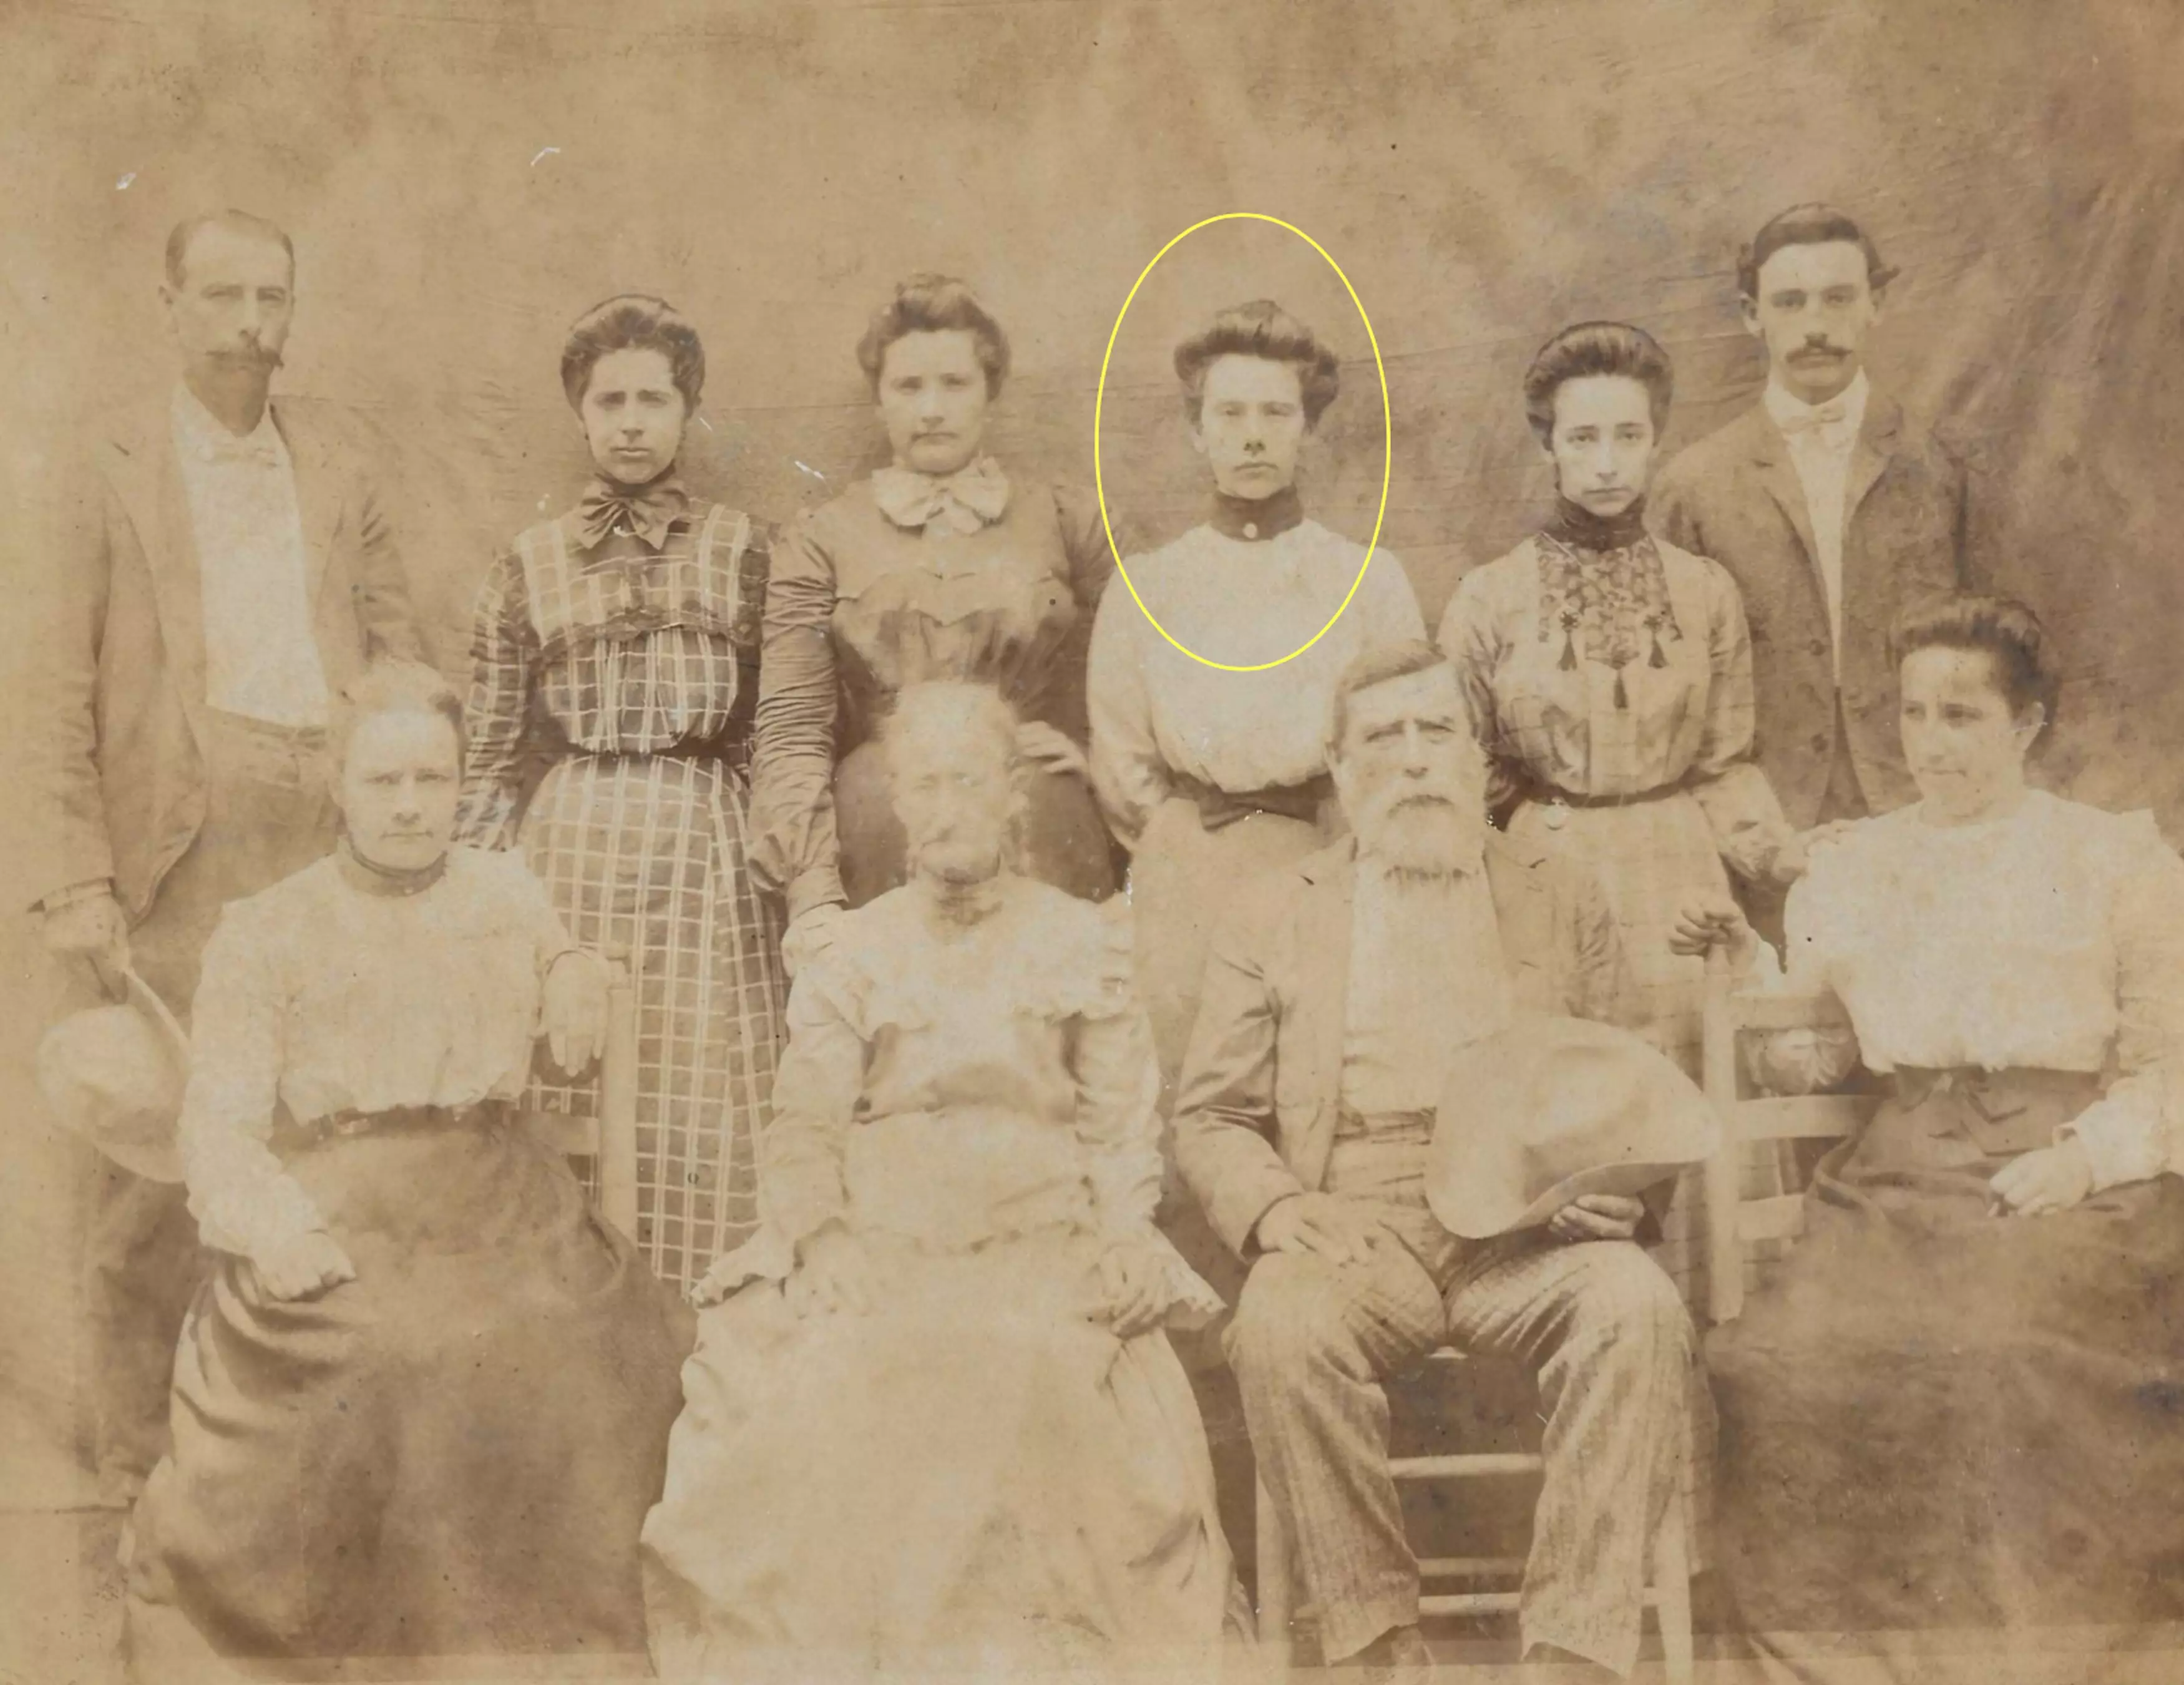 The previous owner thinks the ghost may be her great-grandmother Adele.